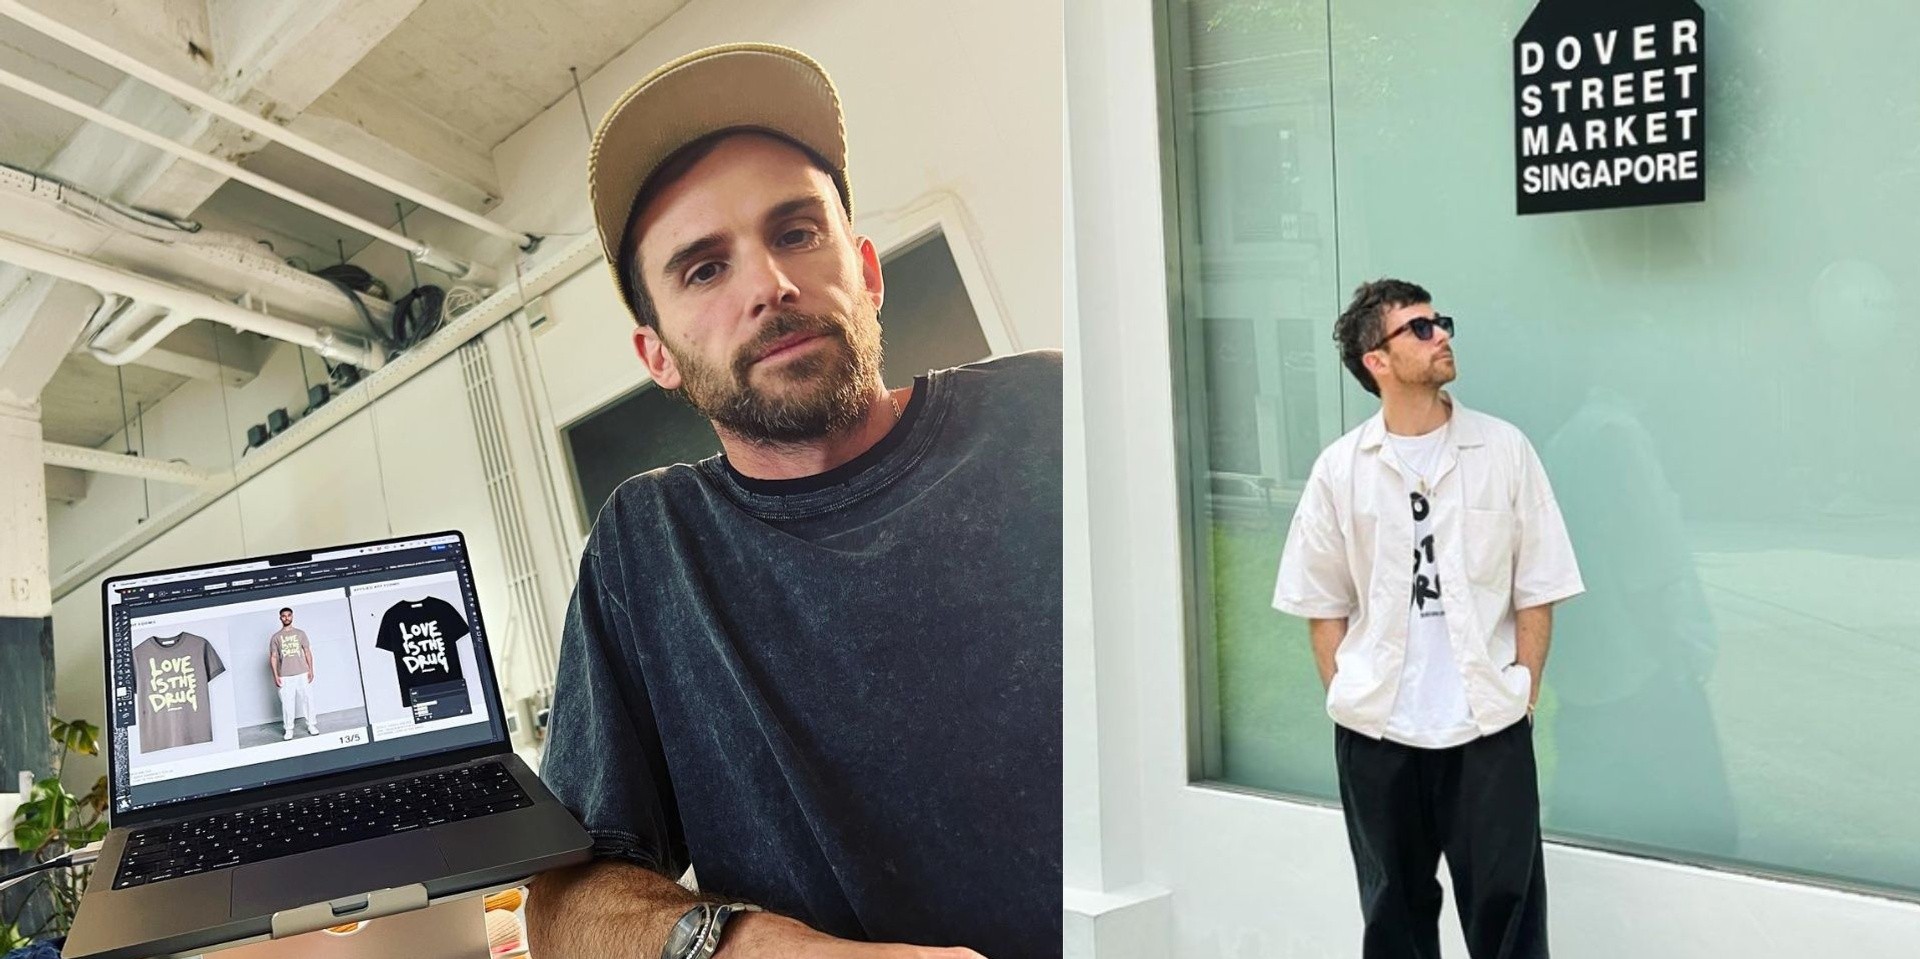 Coldplay's Guy Berryman to make appearance at Singapore's Dover Street Market this weekend